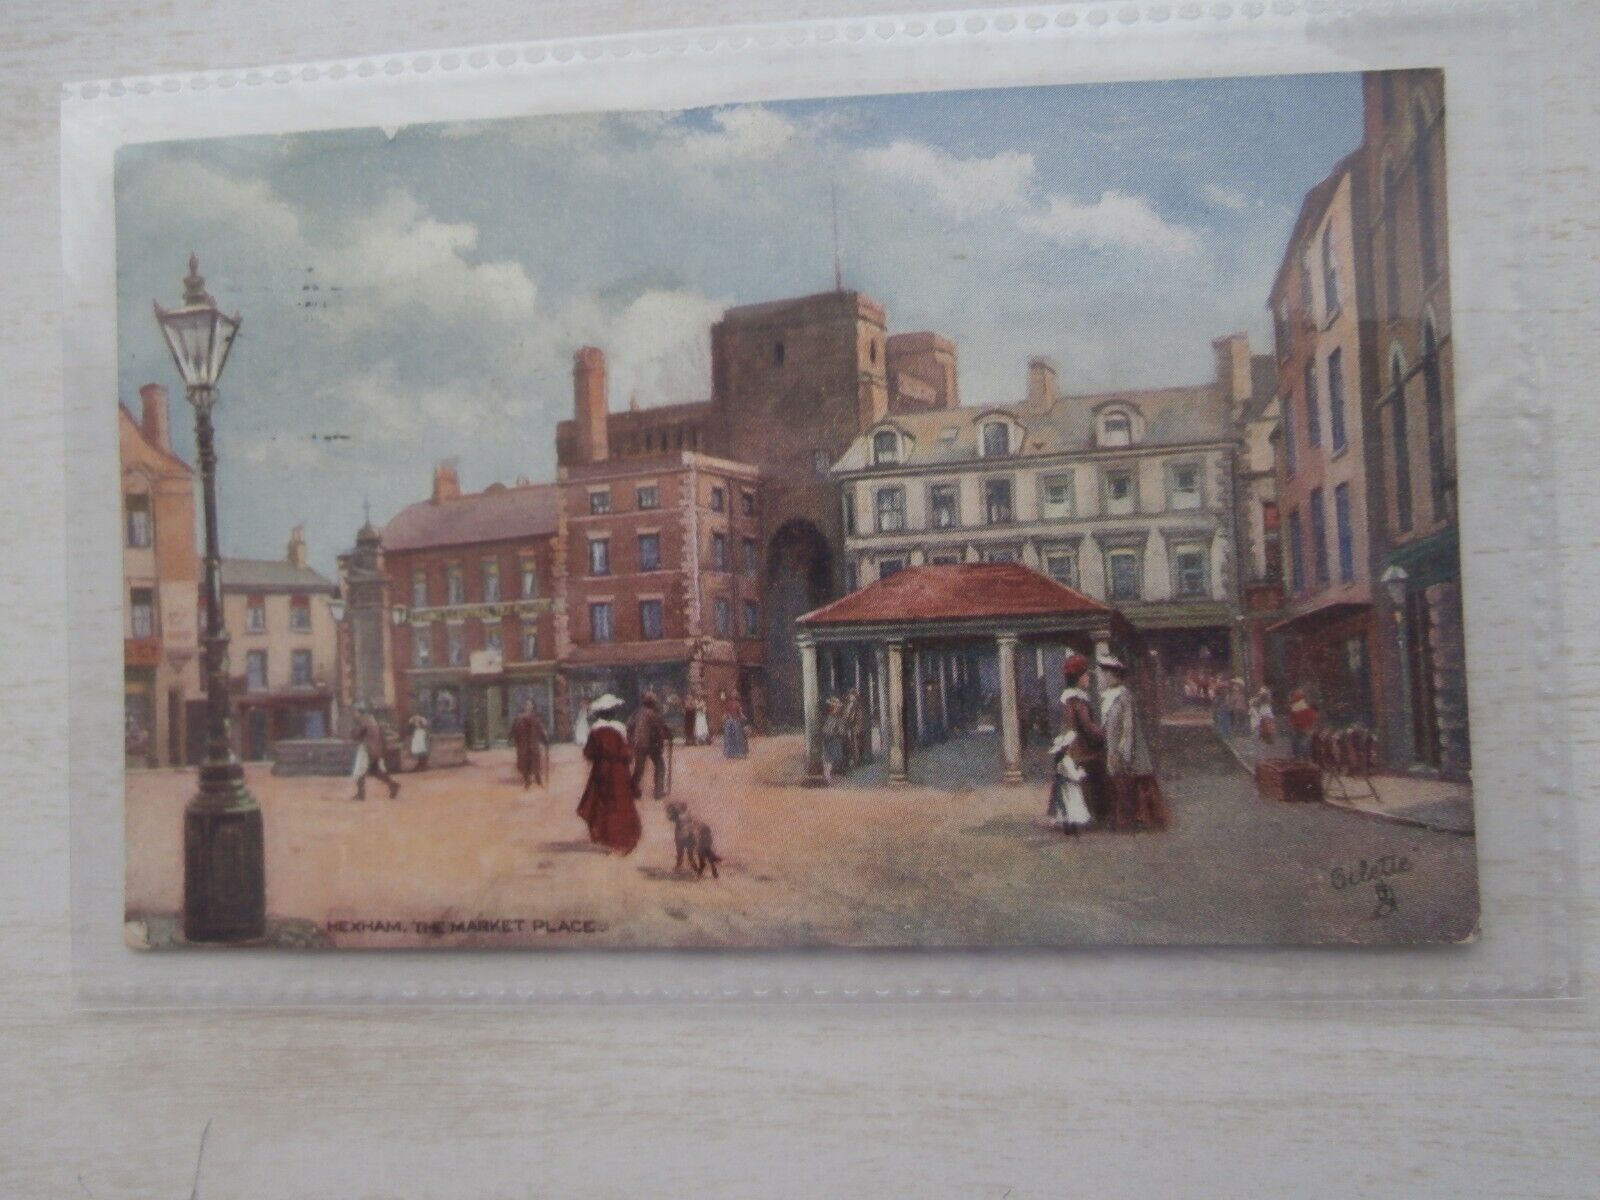 House Clearance - Hexham, Northumberland - Market Place - 1909? colour service (60 )